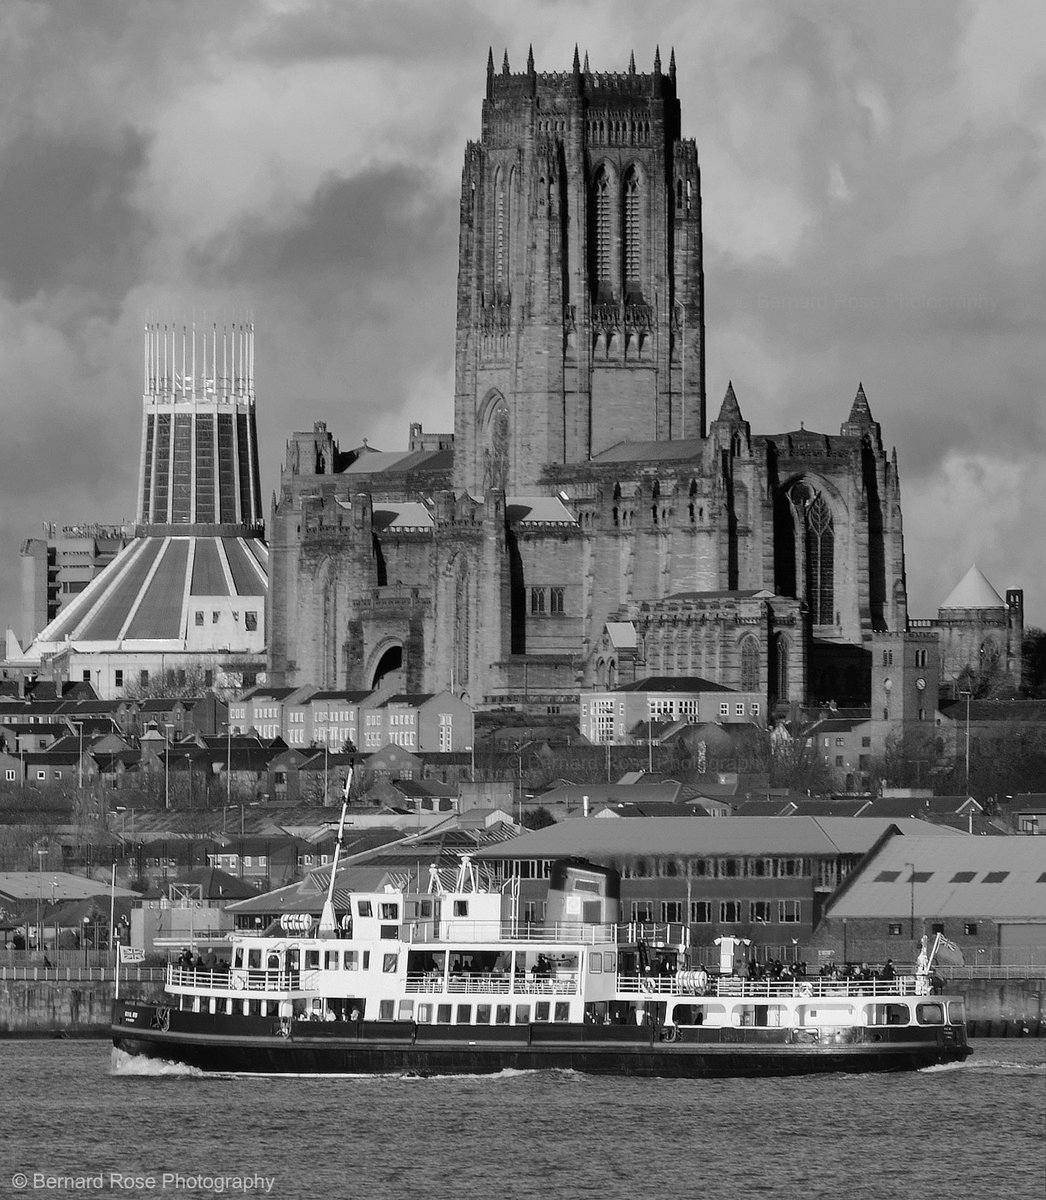 Revisiting this photo I shot a few years ago from Rock Ferry with both Cathedrals and The Royal Iris of the Mersey lined up #Liverpool #merseyferry #liverpoolanglicancathedral #liverpoolmetropolitancathedral